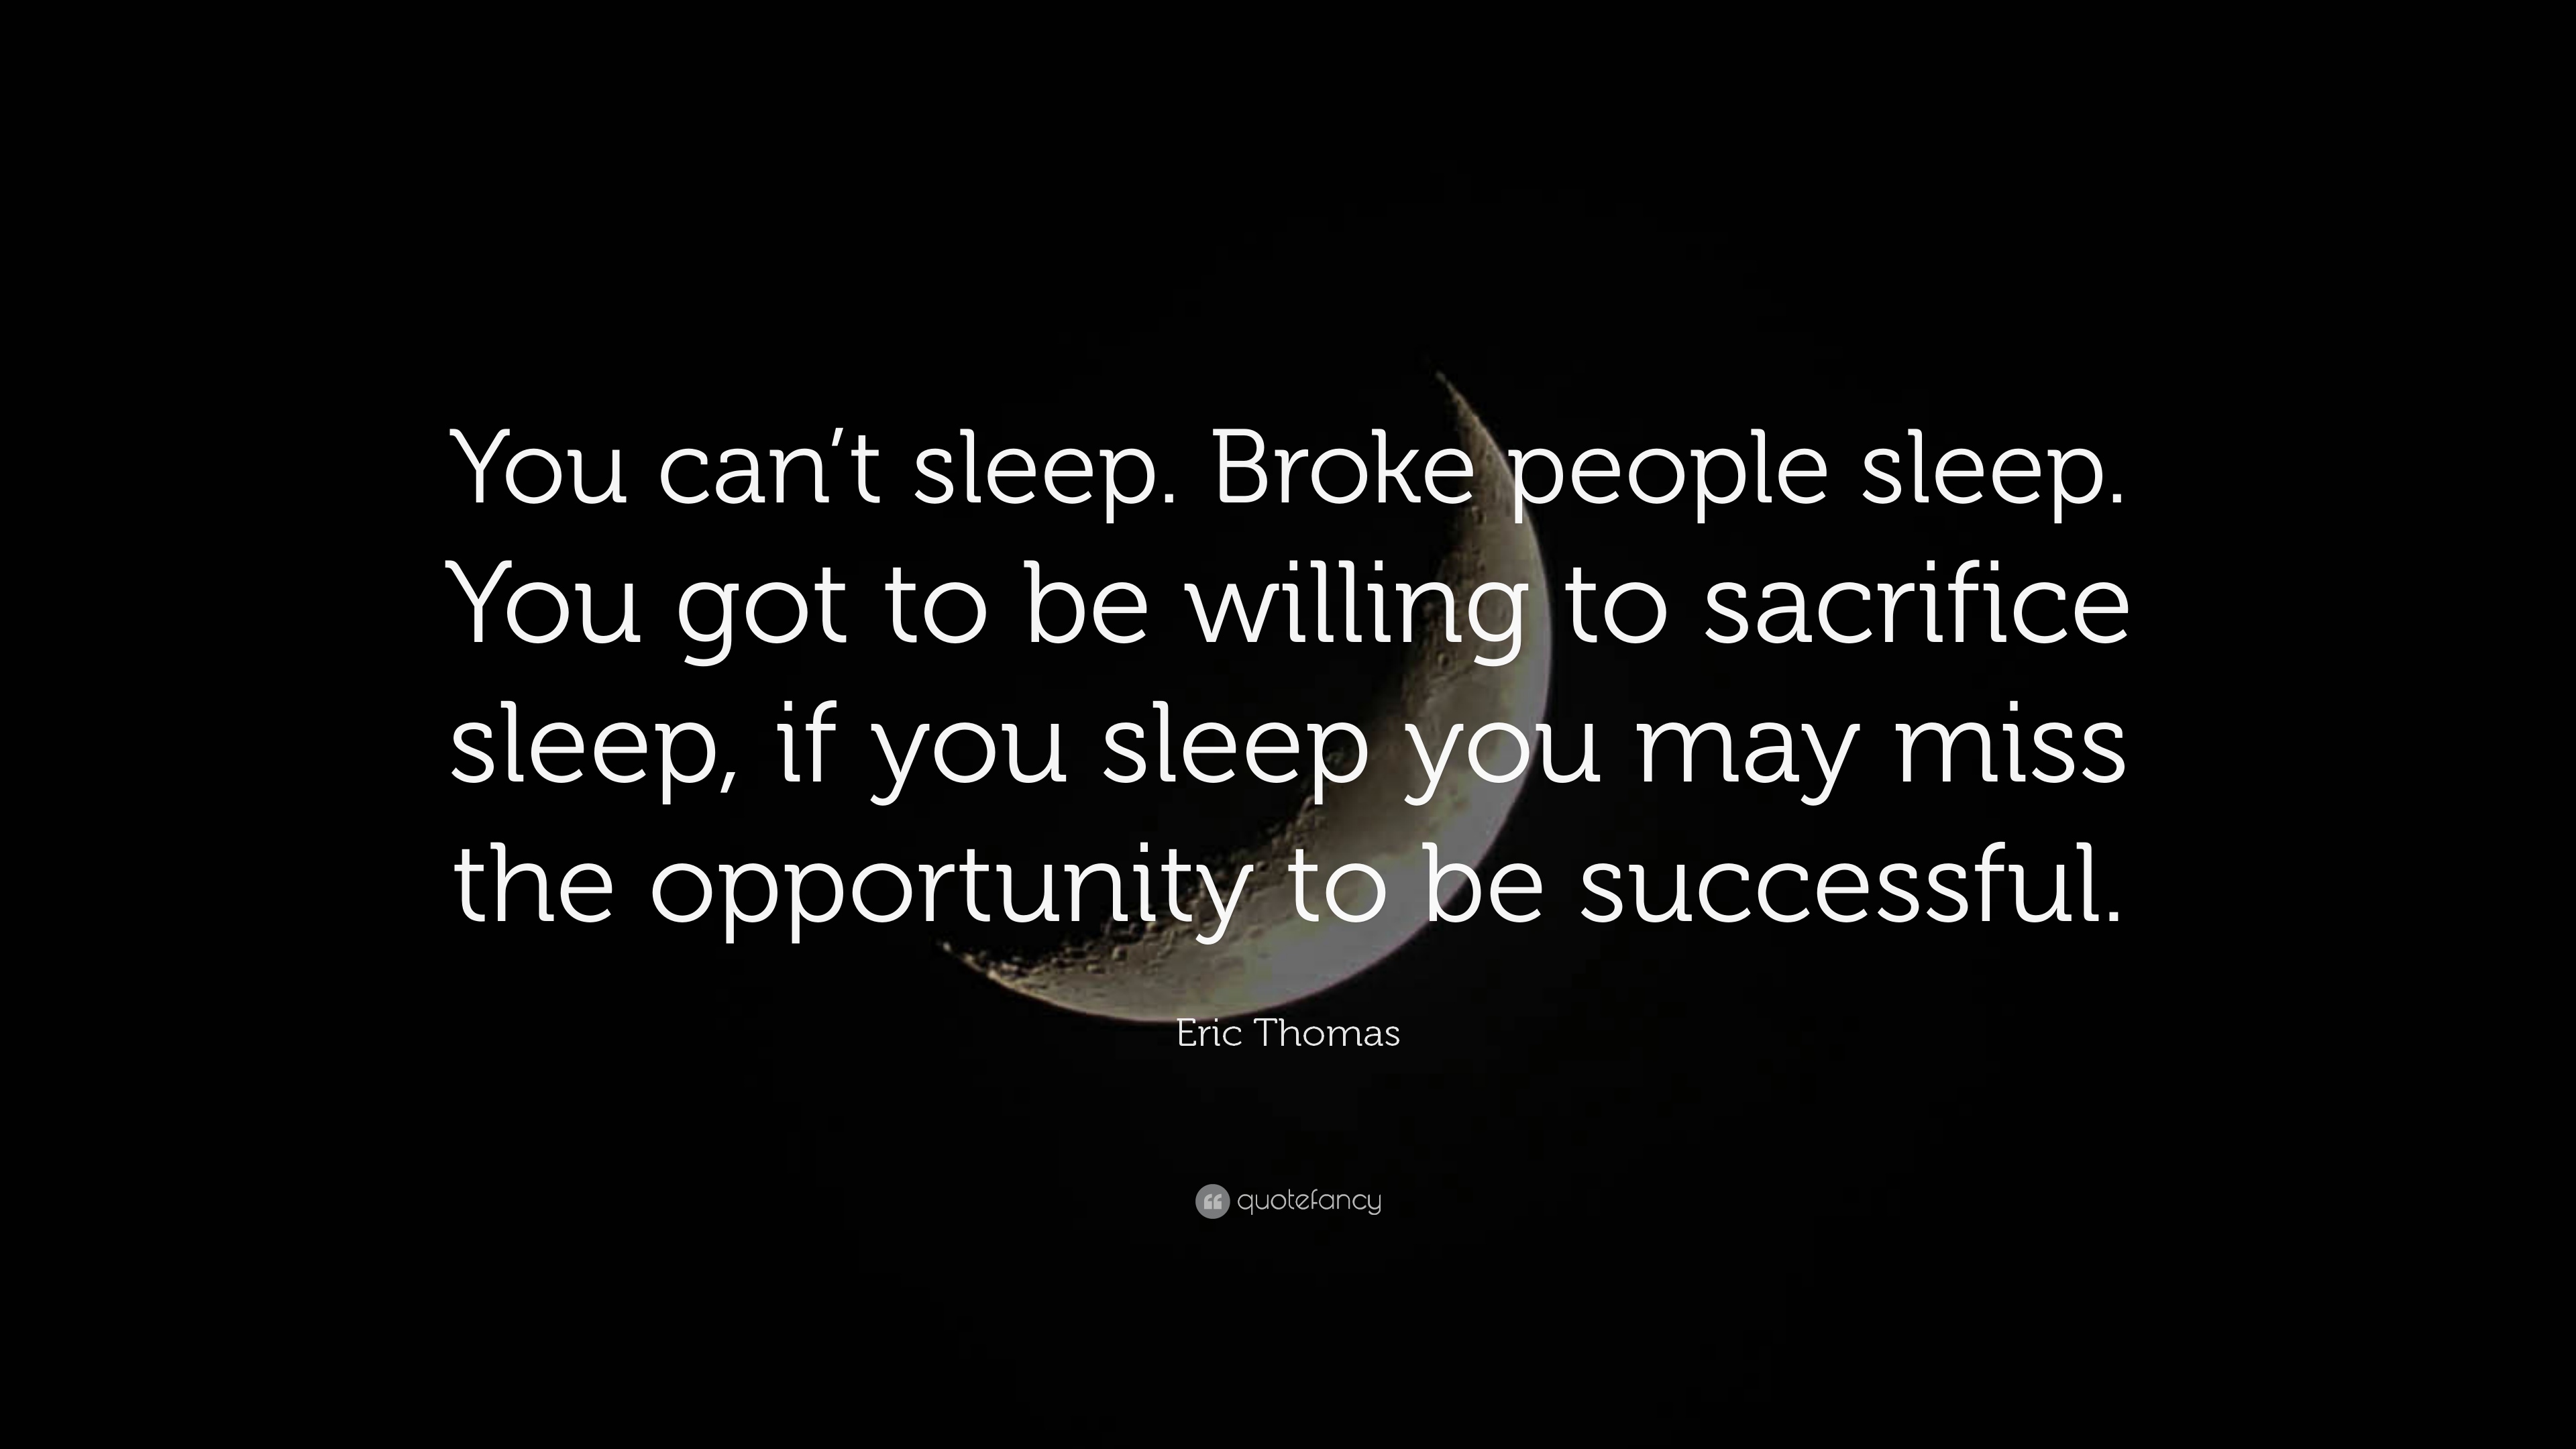 Eric Thomas Quote: “You can't sleep. Broke people sleep. You got to be willing to sacrifice sleep, if you sleep you may miss the opportunity.”